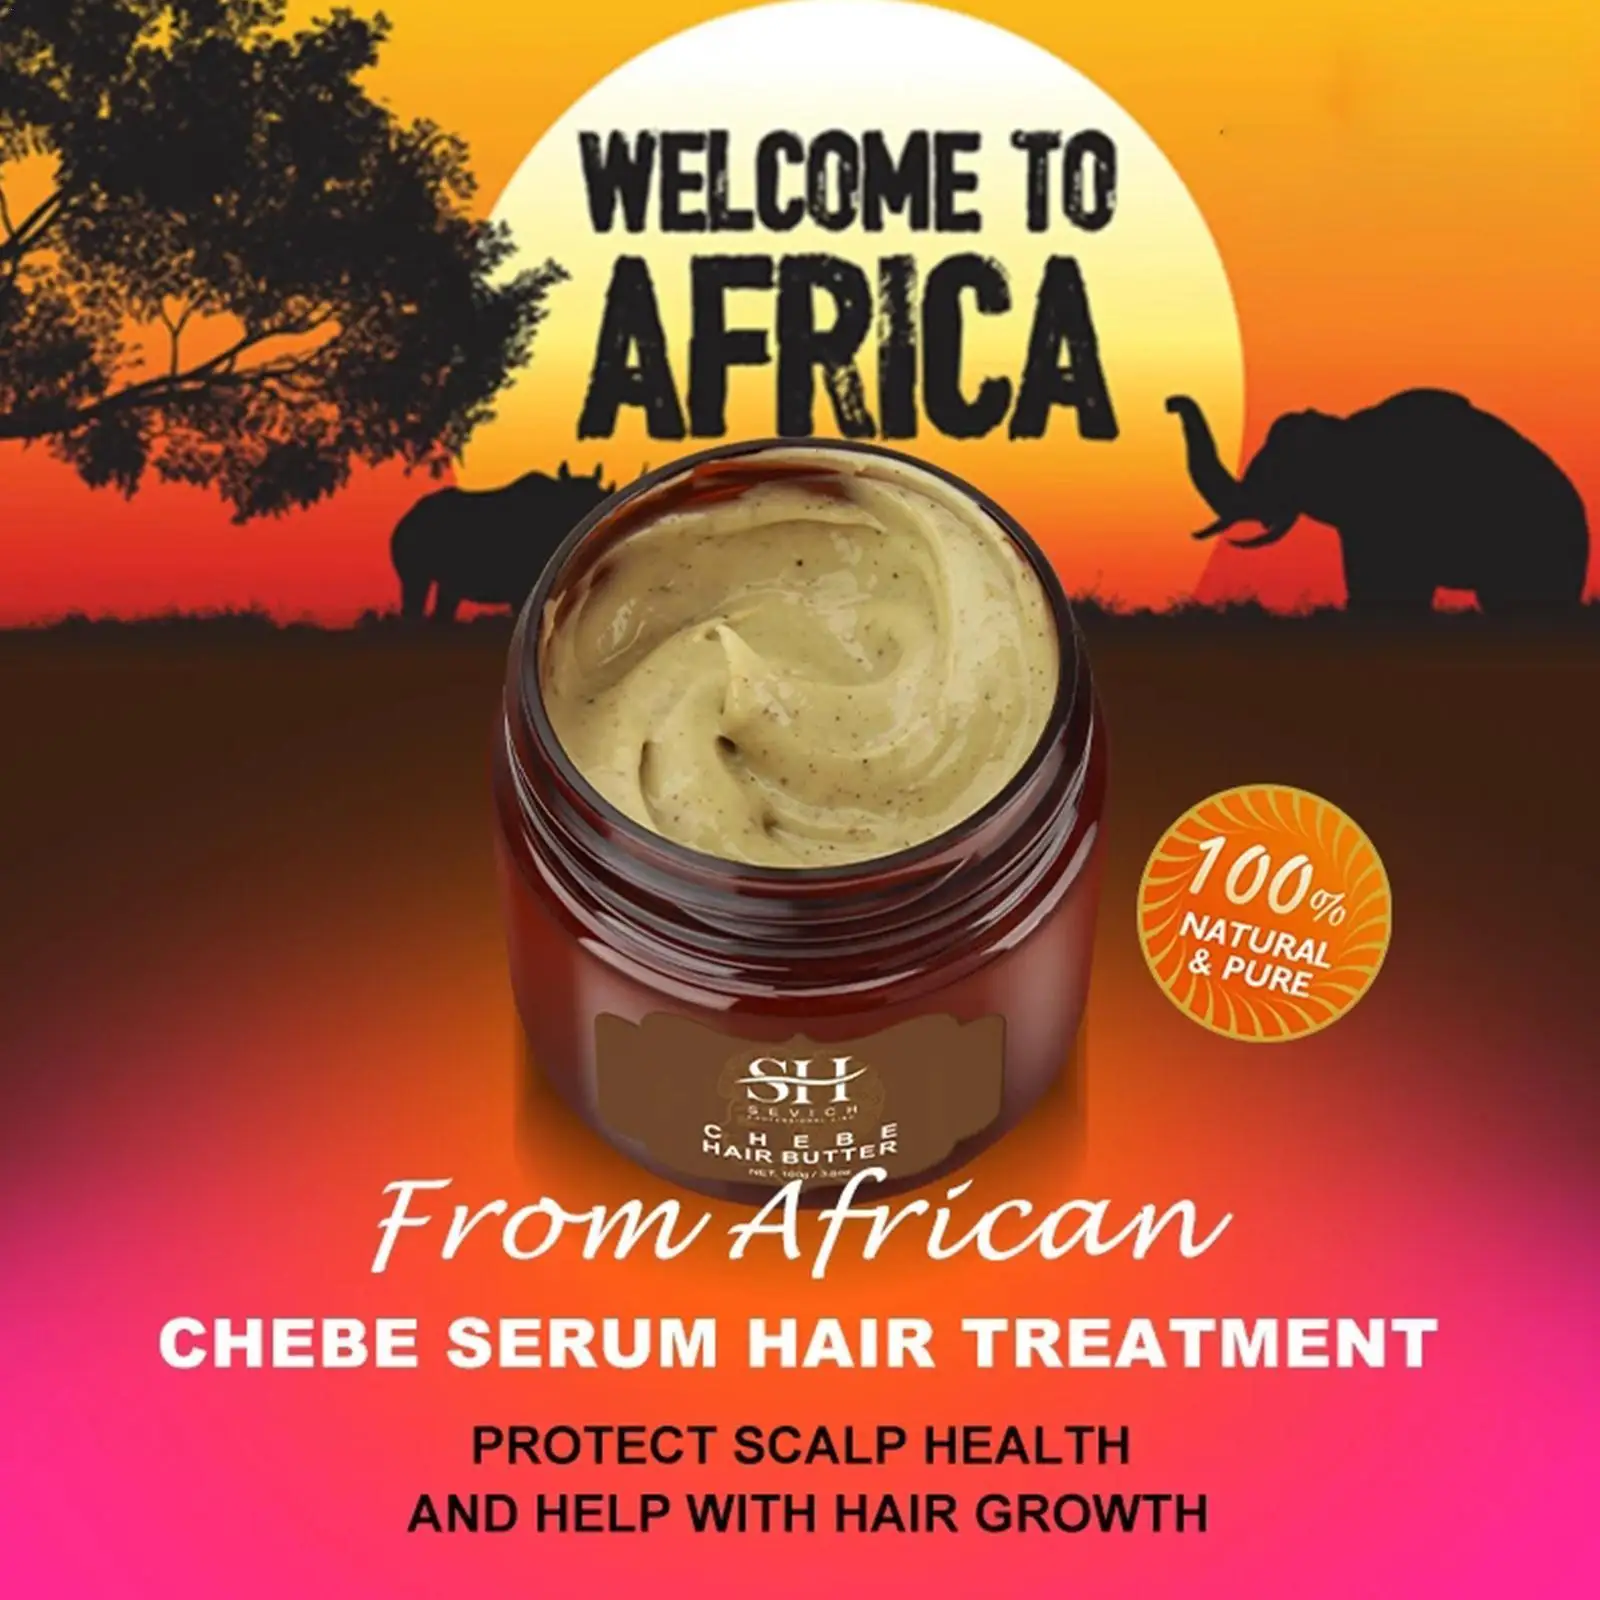 

Sevich 100g Africa Traction Alopecia Chebe Hair Butter Hair Moisturize Loss Treatment Protect Hair Strong Natural Root Hair A5I6